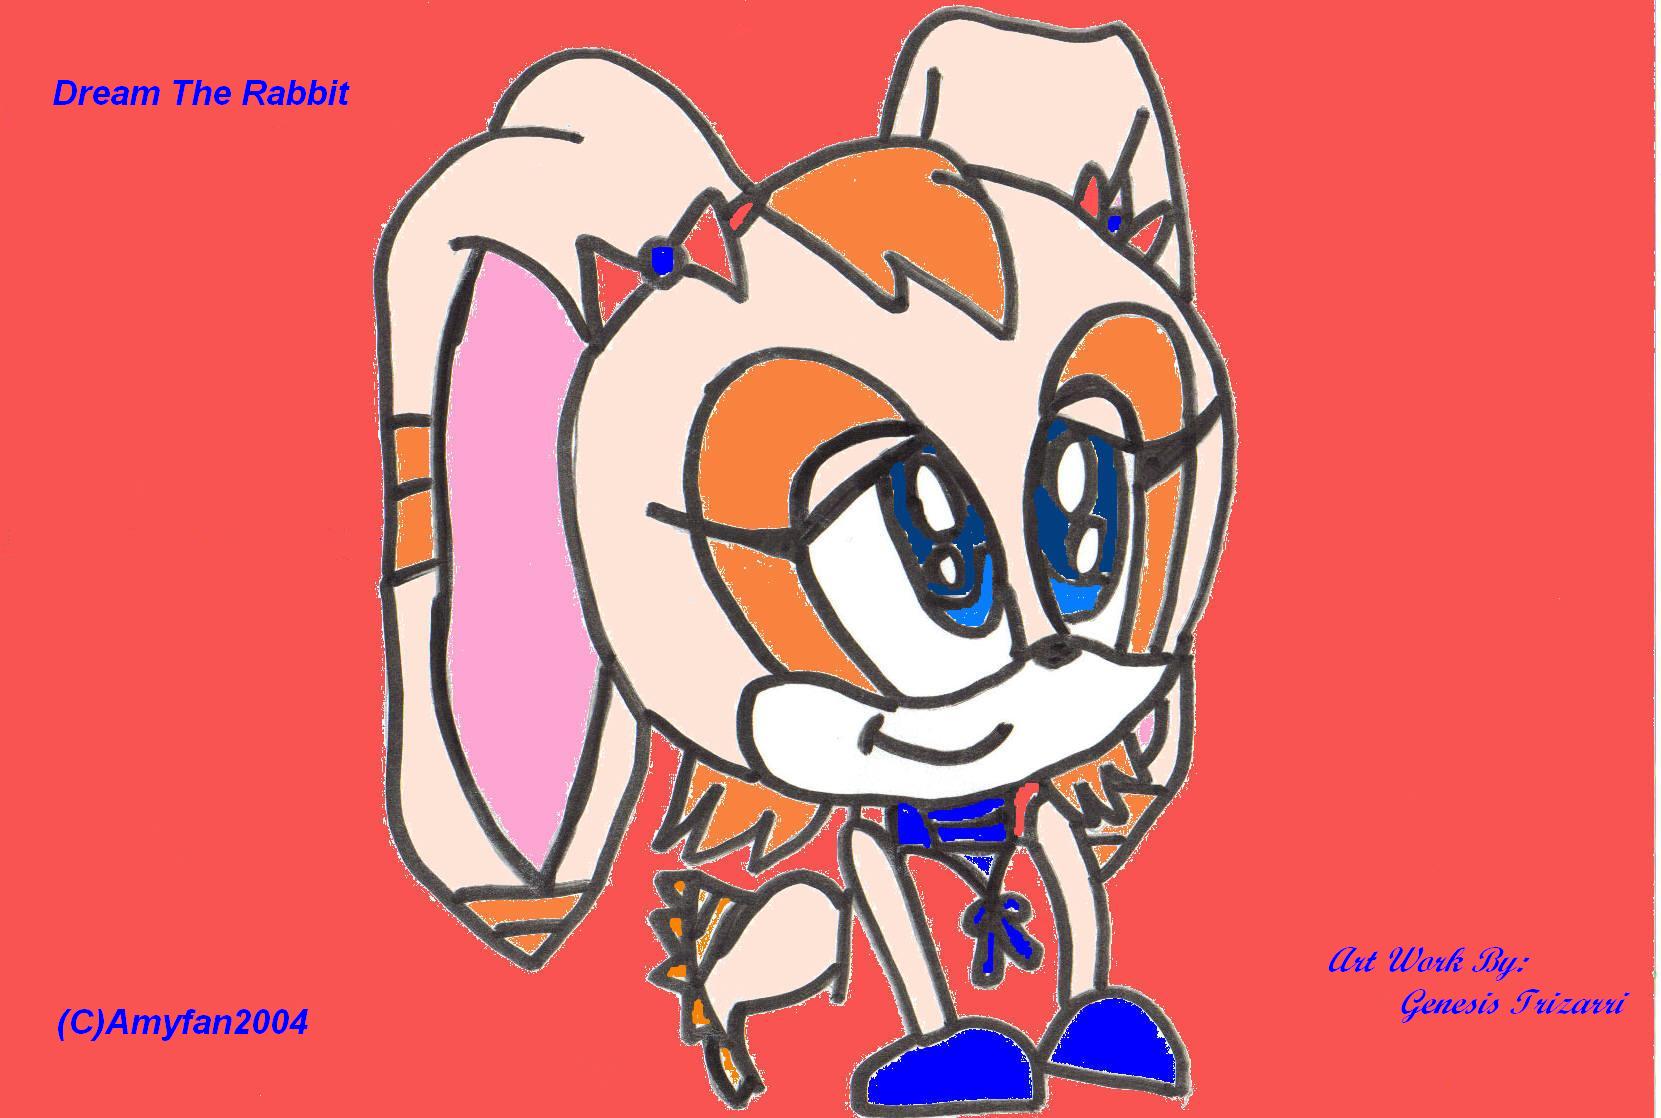 Introducing... Dream The Rabbit! by Amyfan2004